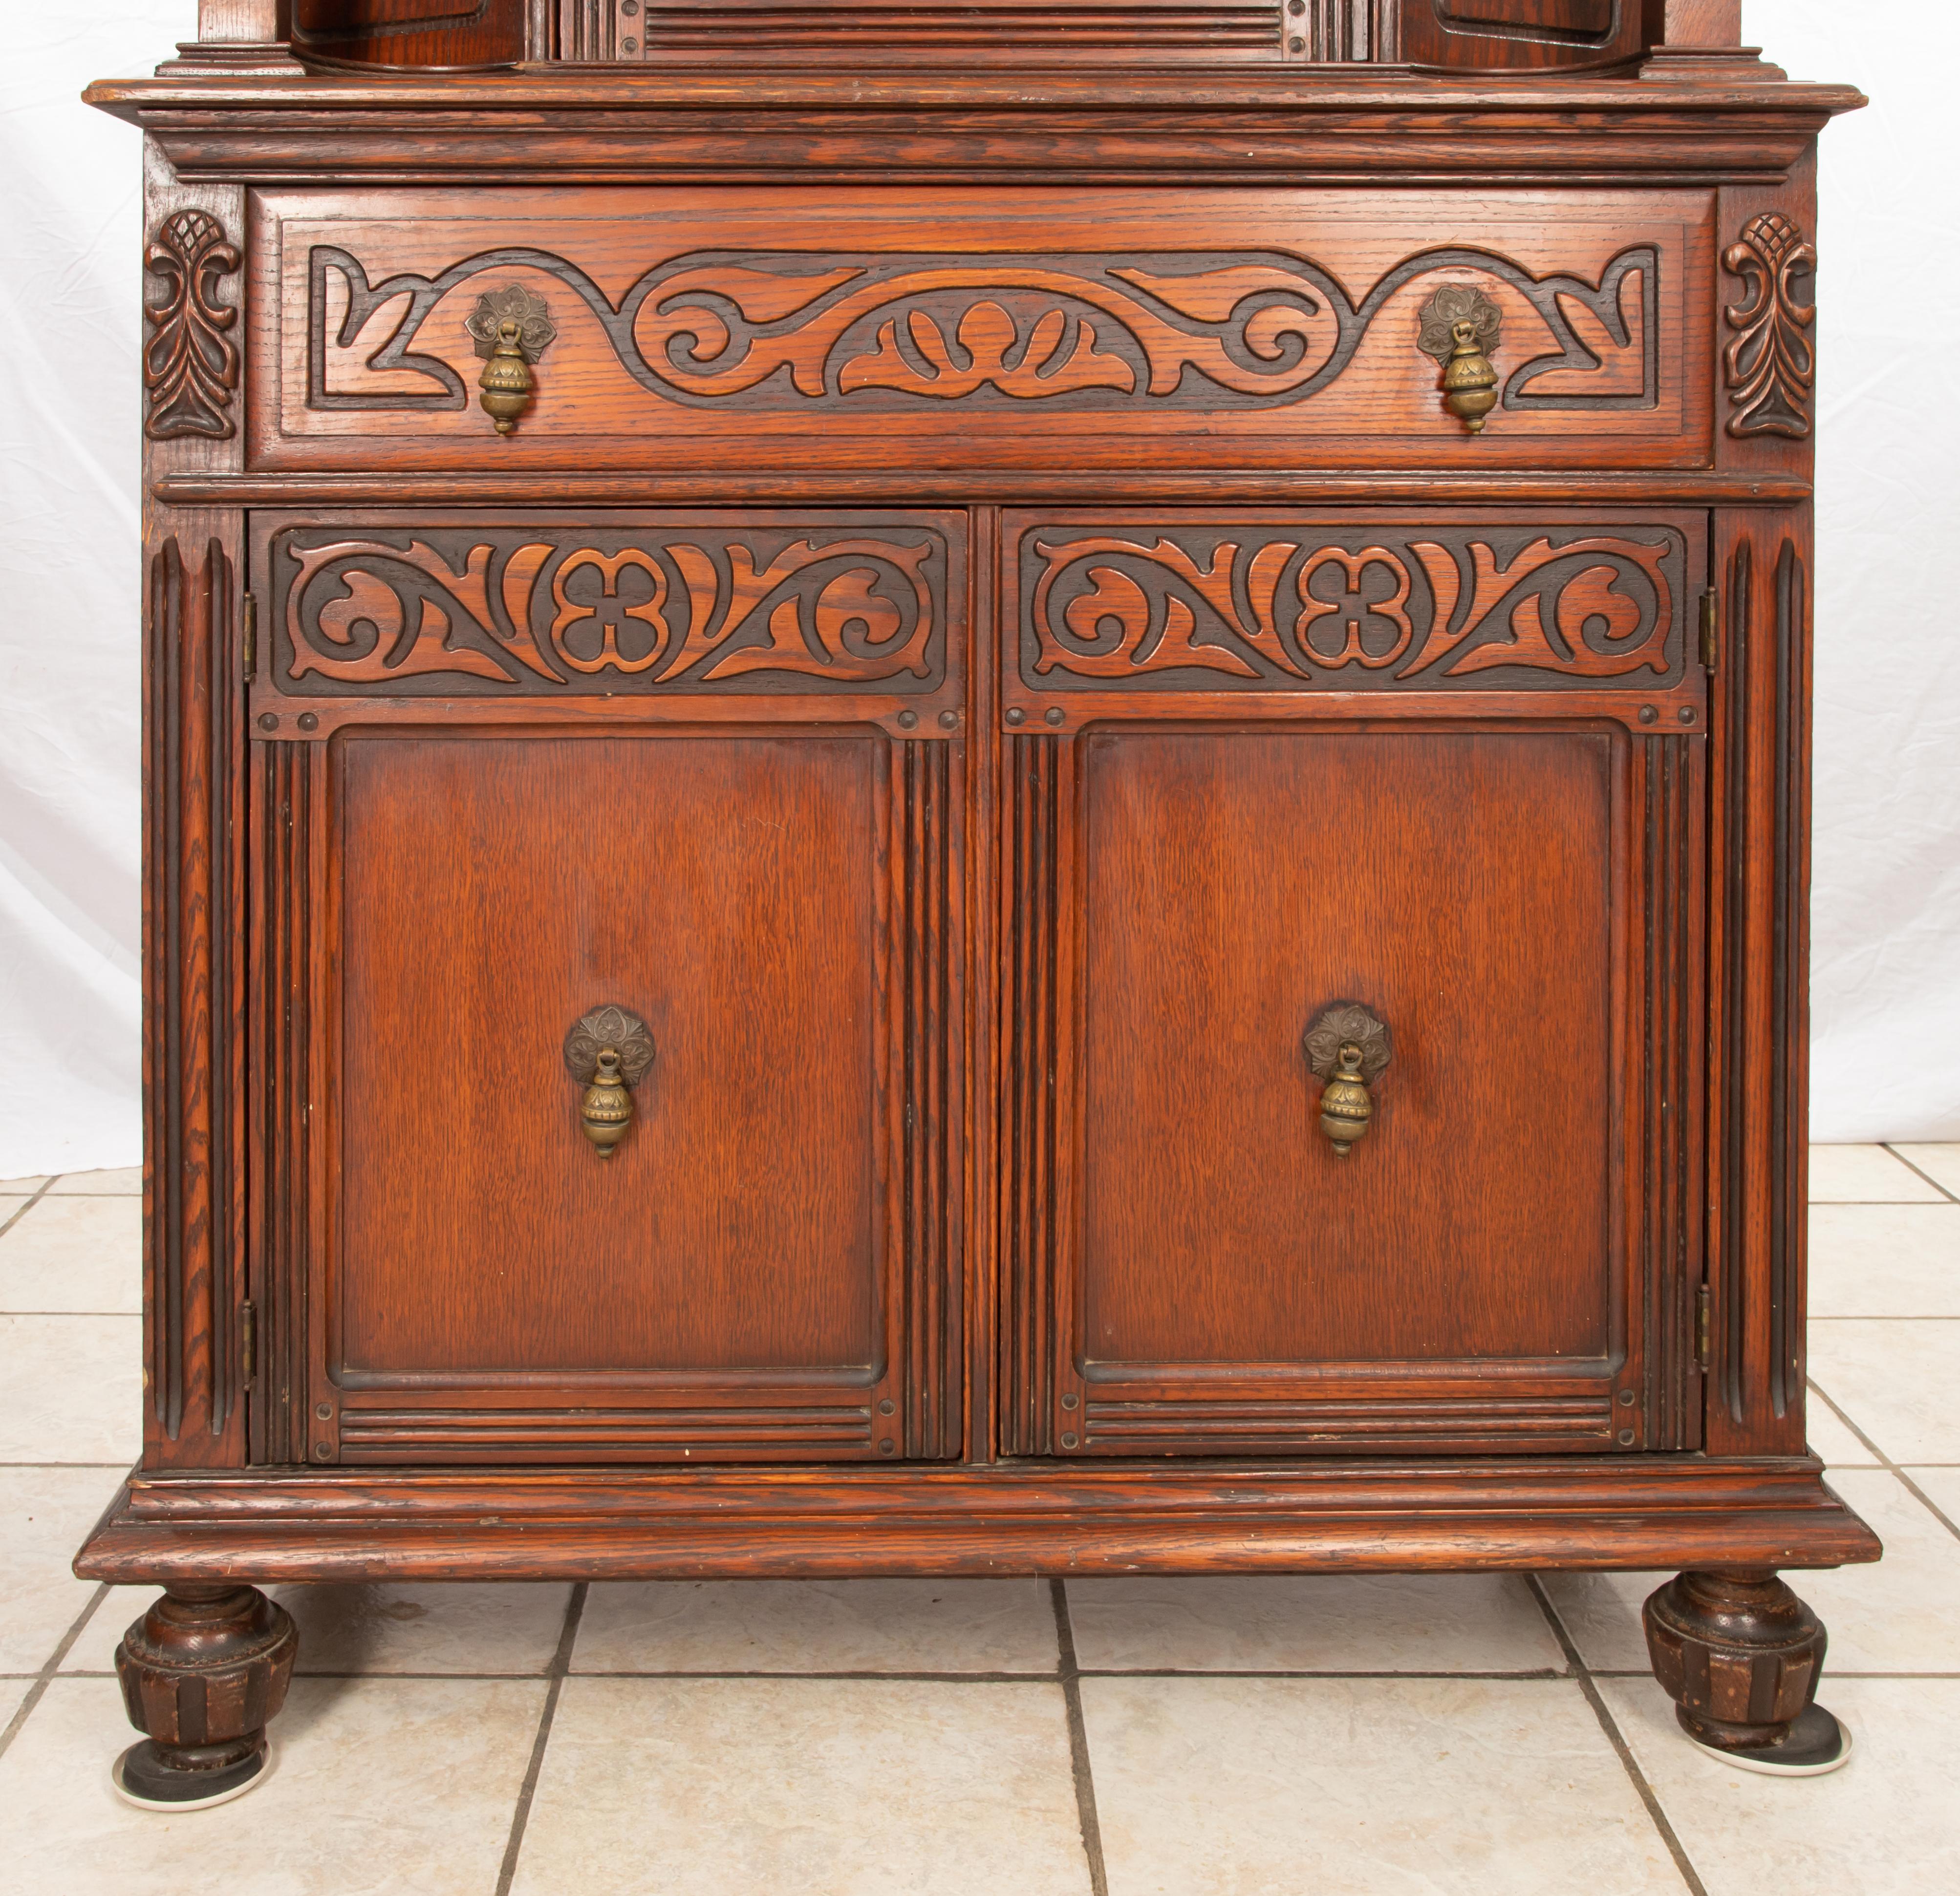 Jacobean Revival Court Cupboard In Good Condition For Sale In Cookeville, TN